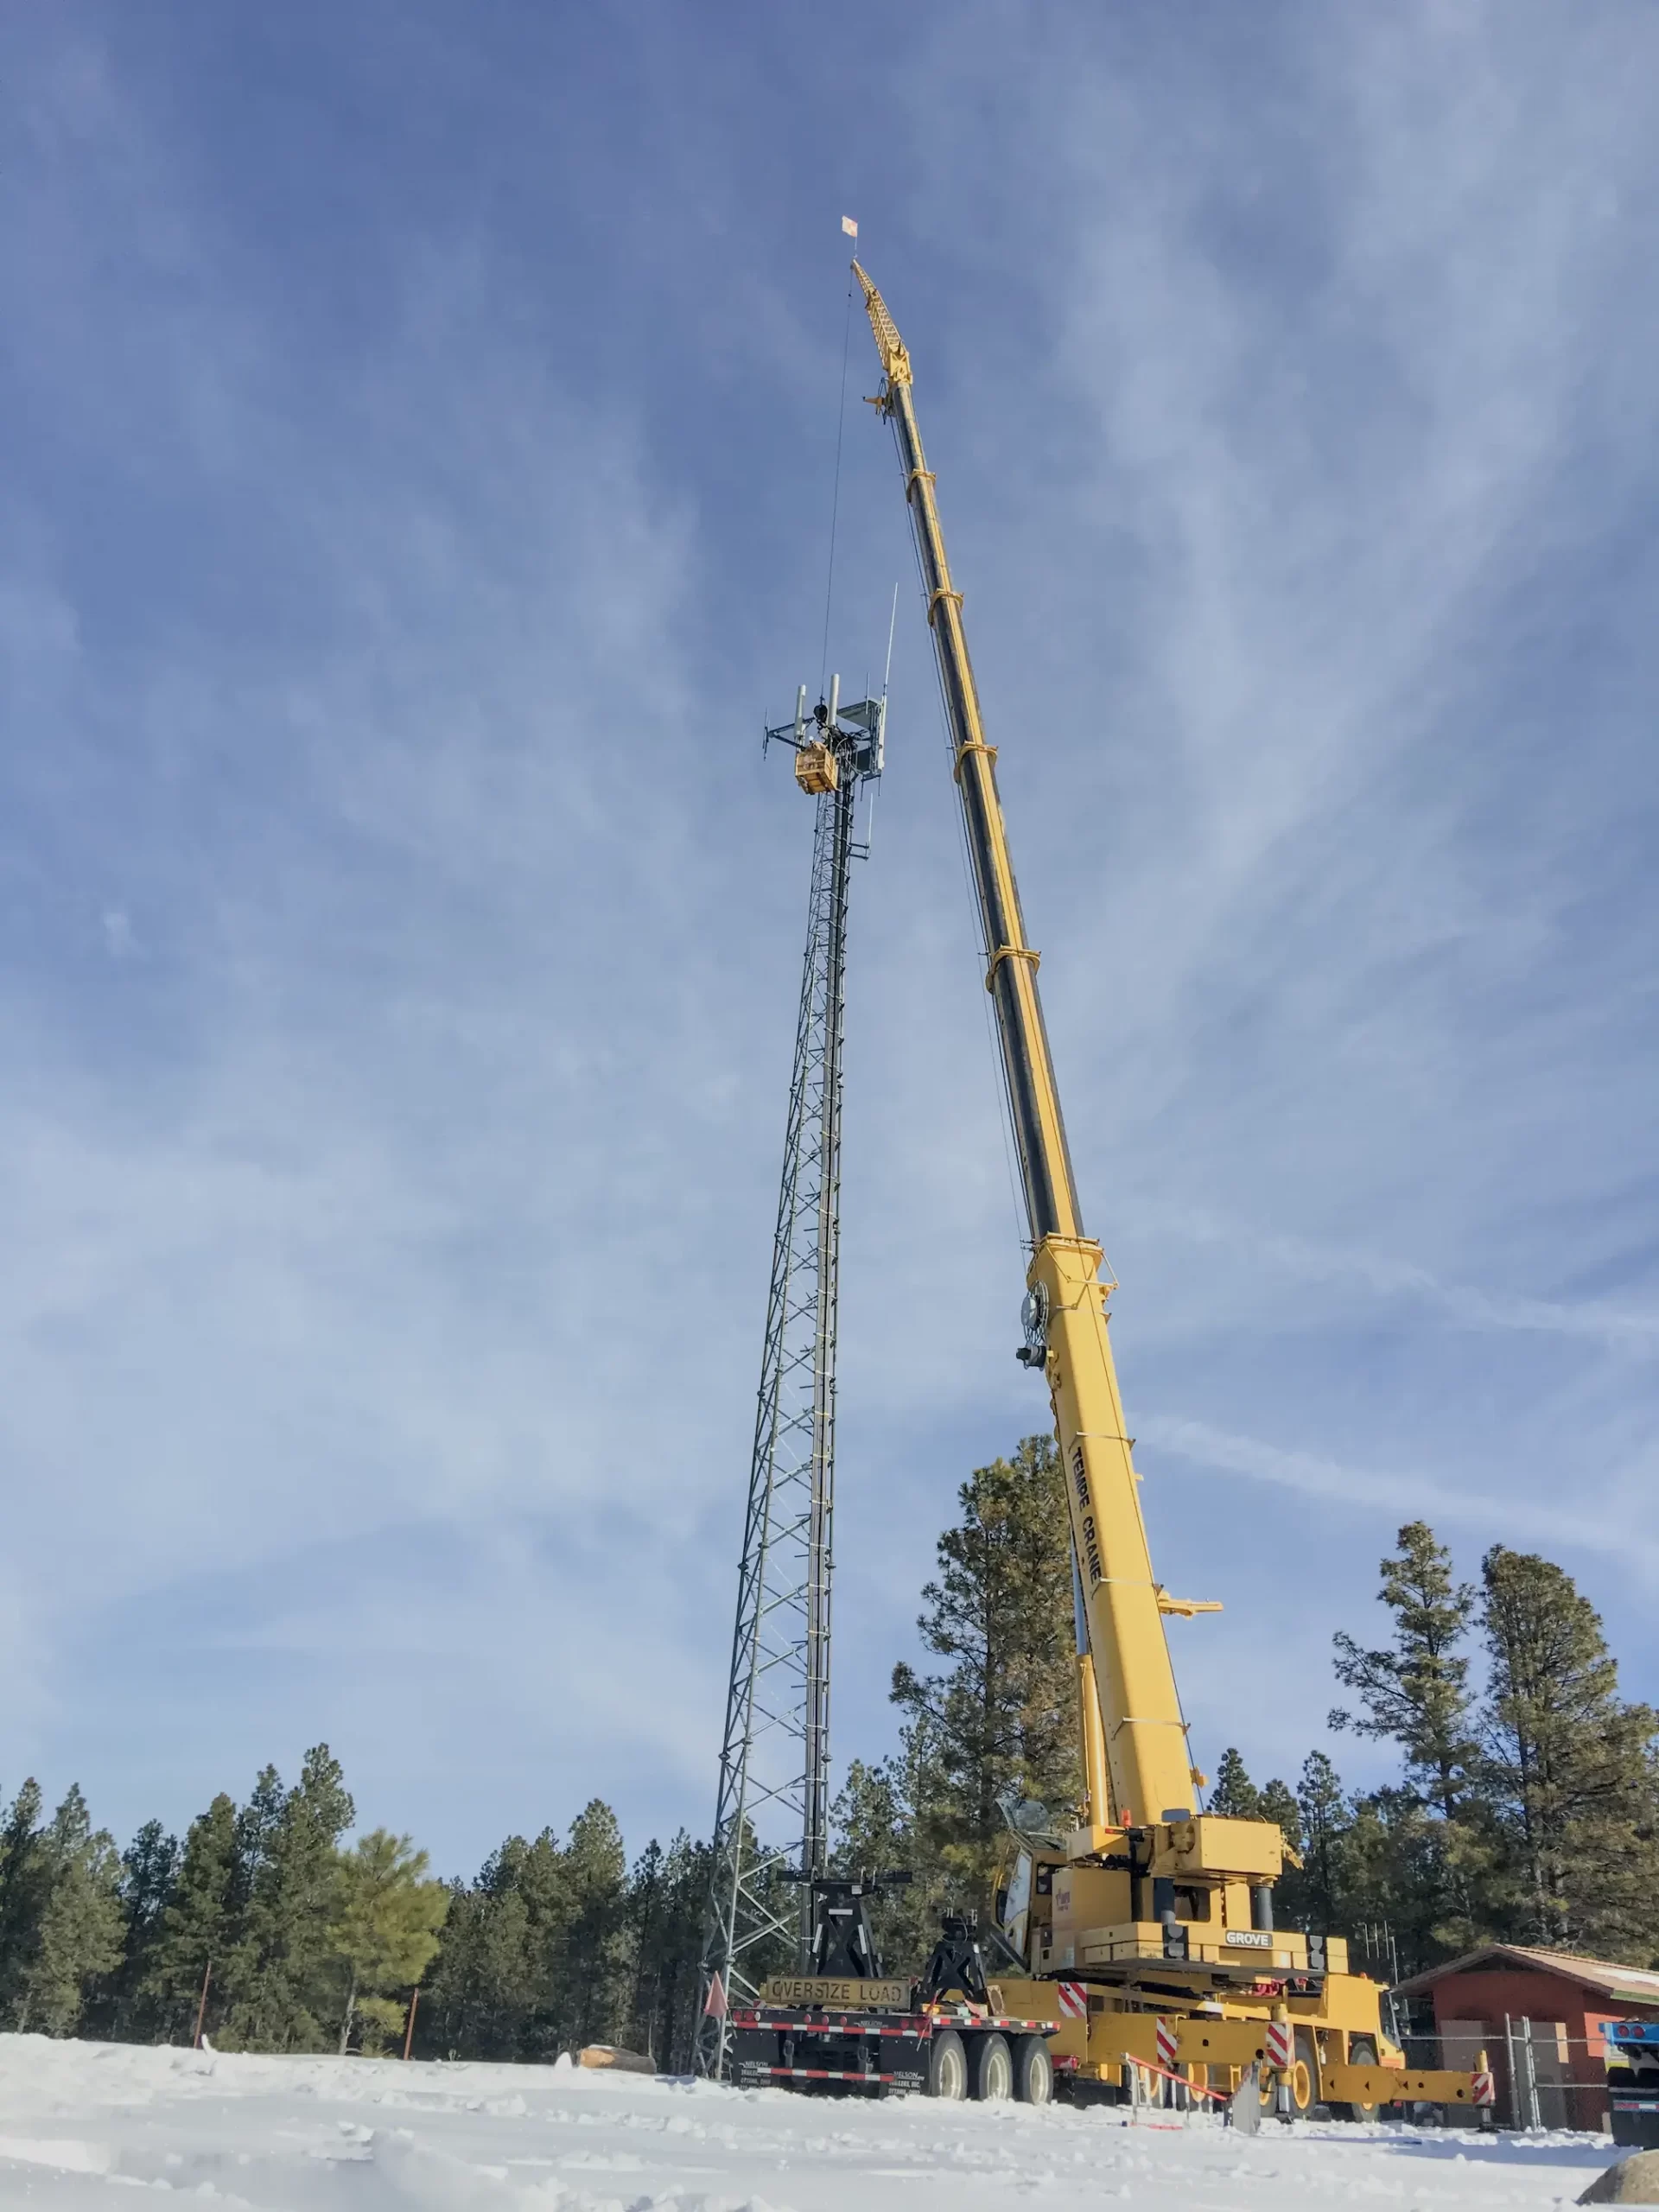 Specialized crane service elevating workers to service a cell tower, underpinning the importance of seamless connectivity.